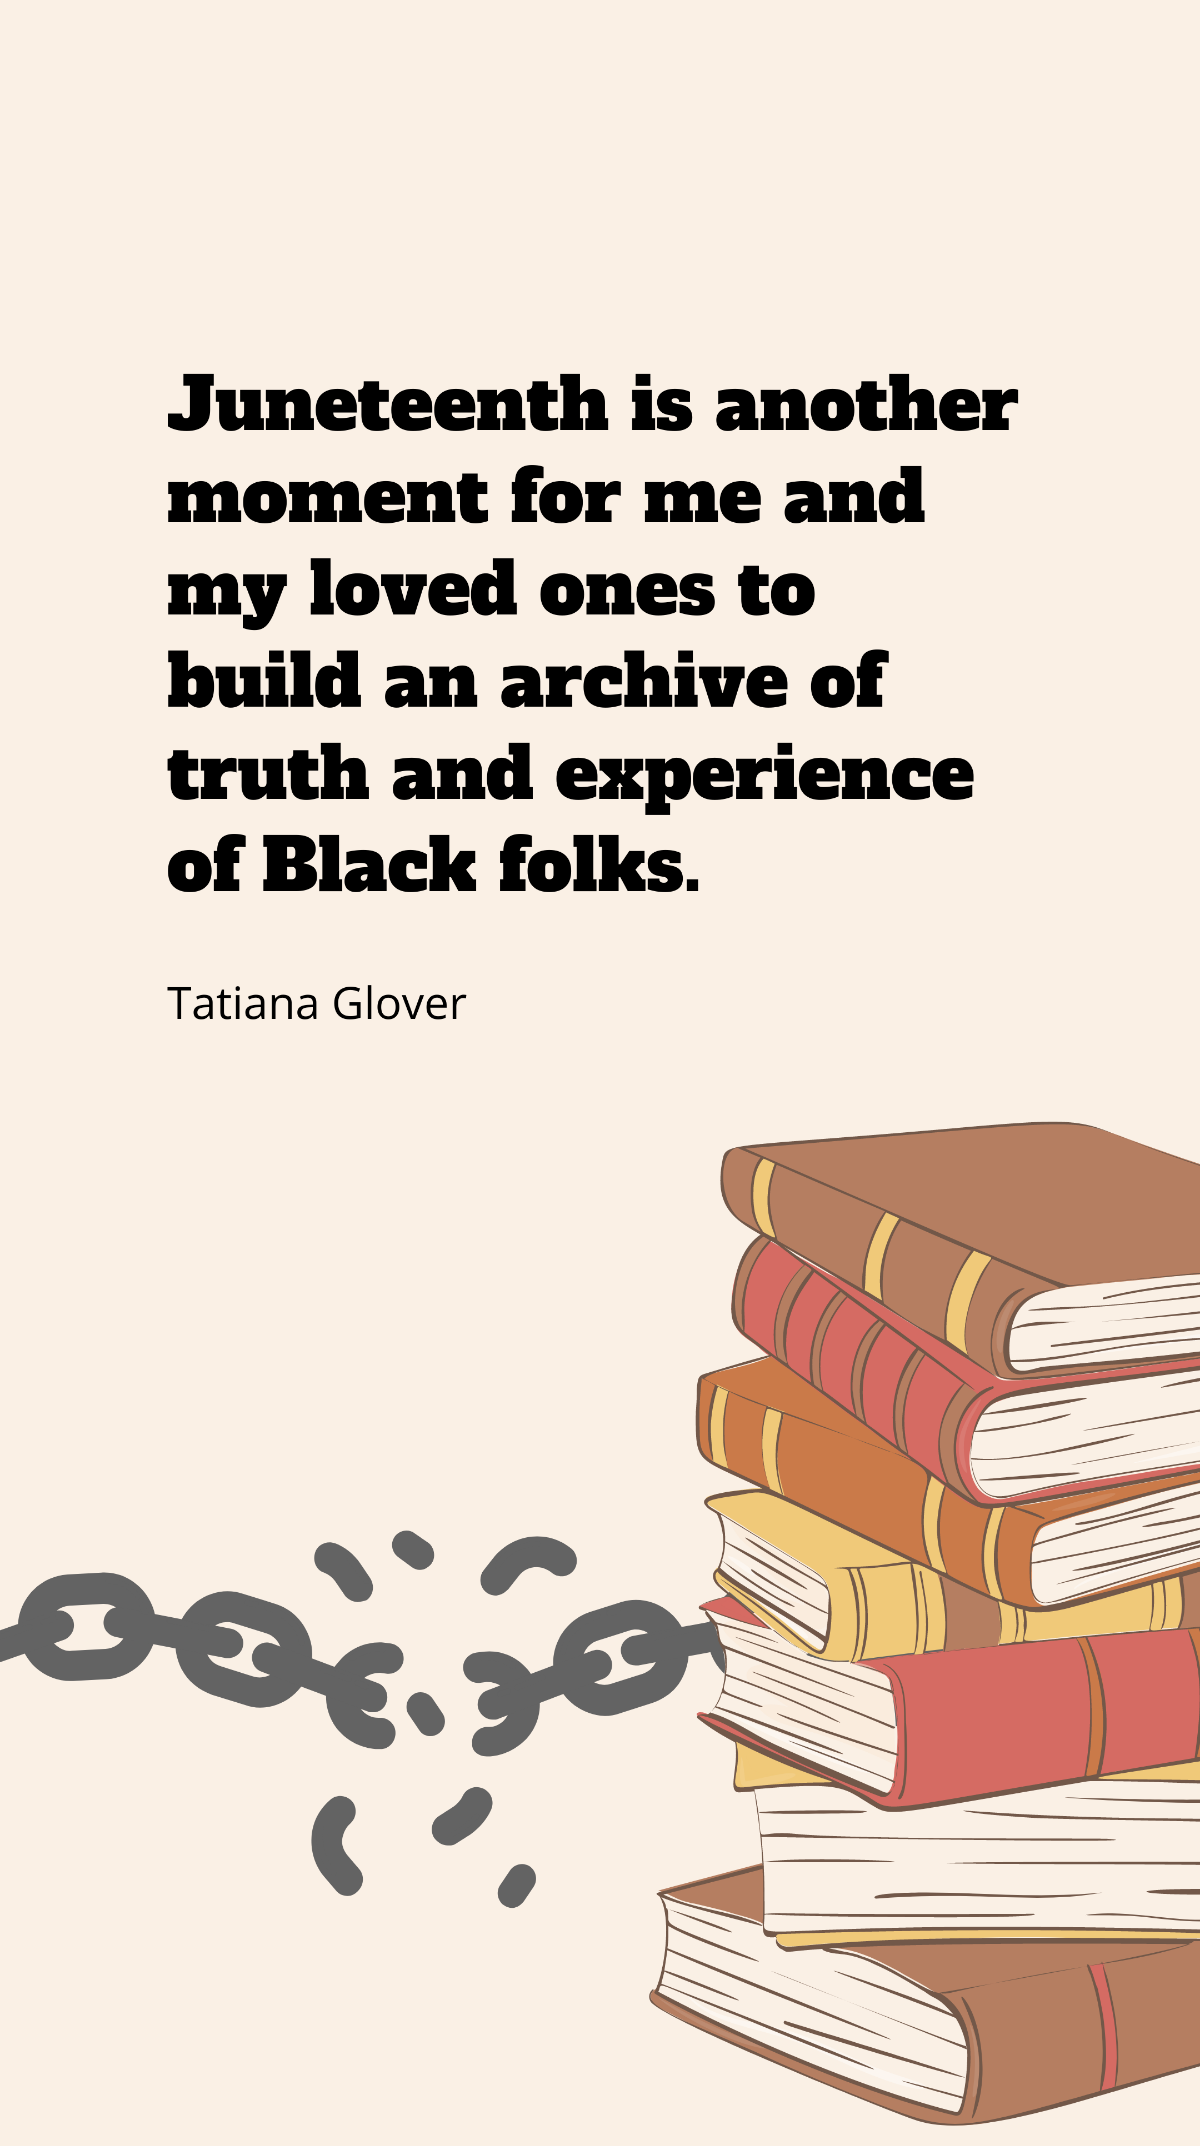 Tatiana Glover - Juneteenth is another moment for me and my loved ones to build an archive of truth and experience of Black folks. Template